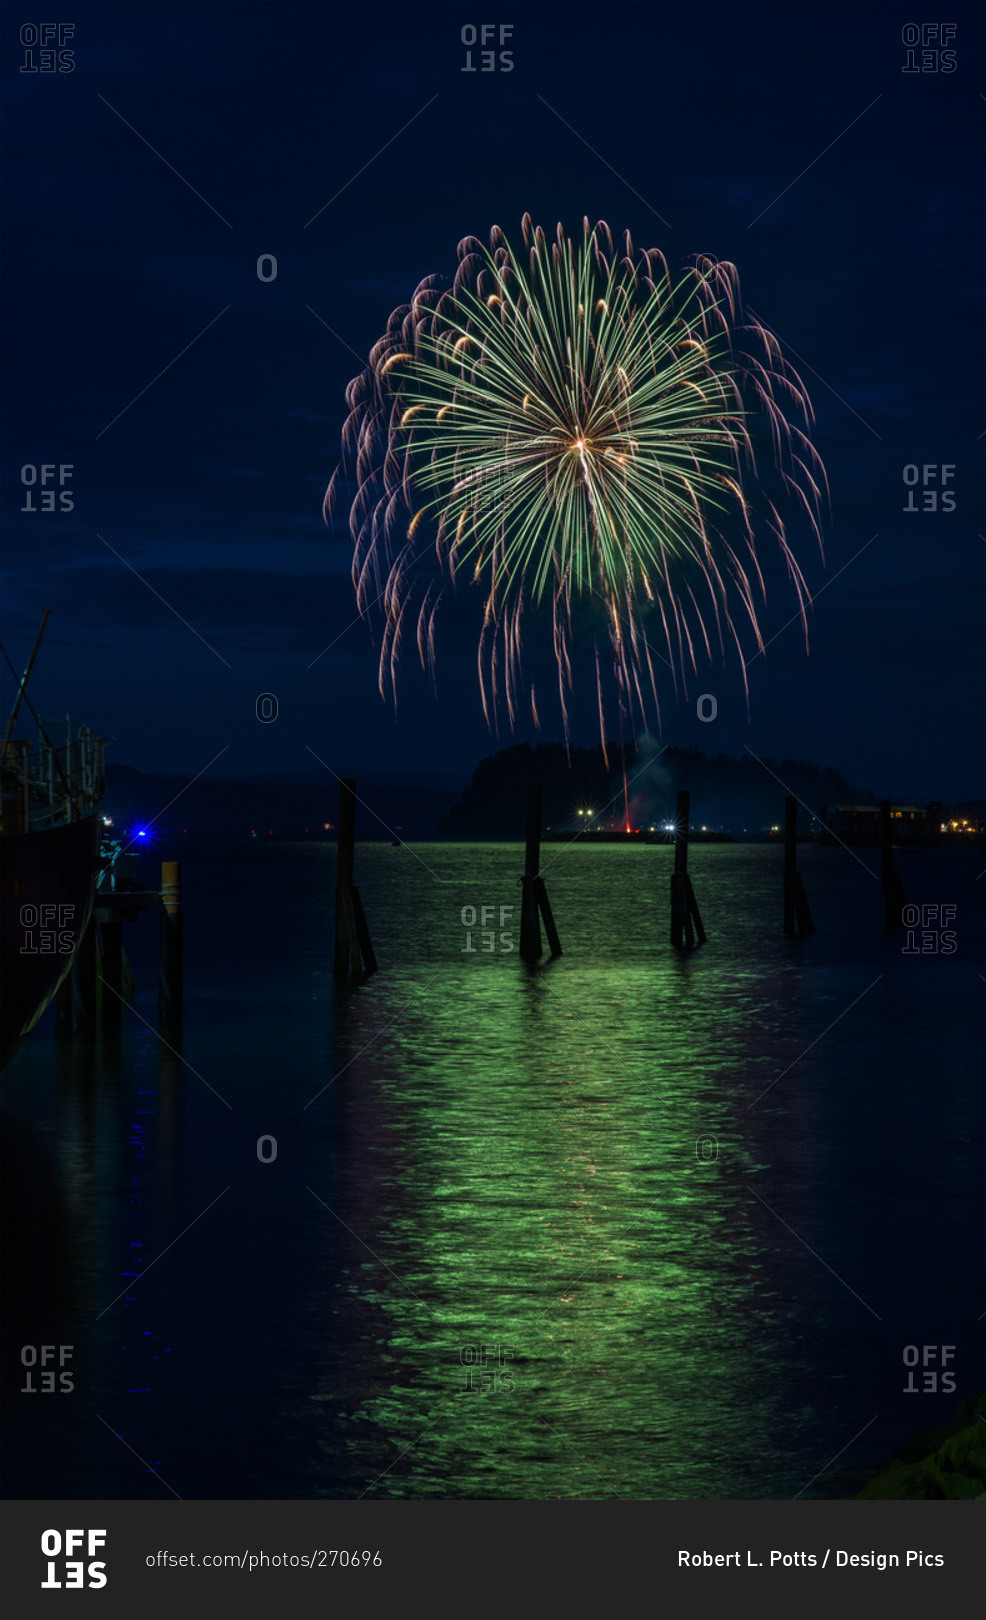 Fireworks explode on the fourth of July, Astoria, Oregon, United States